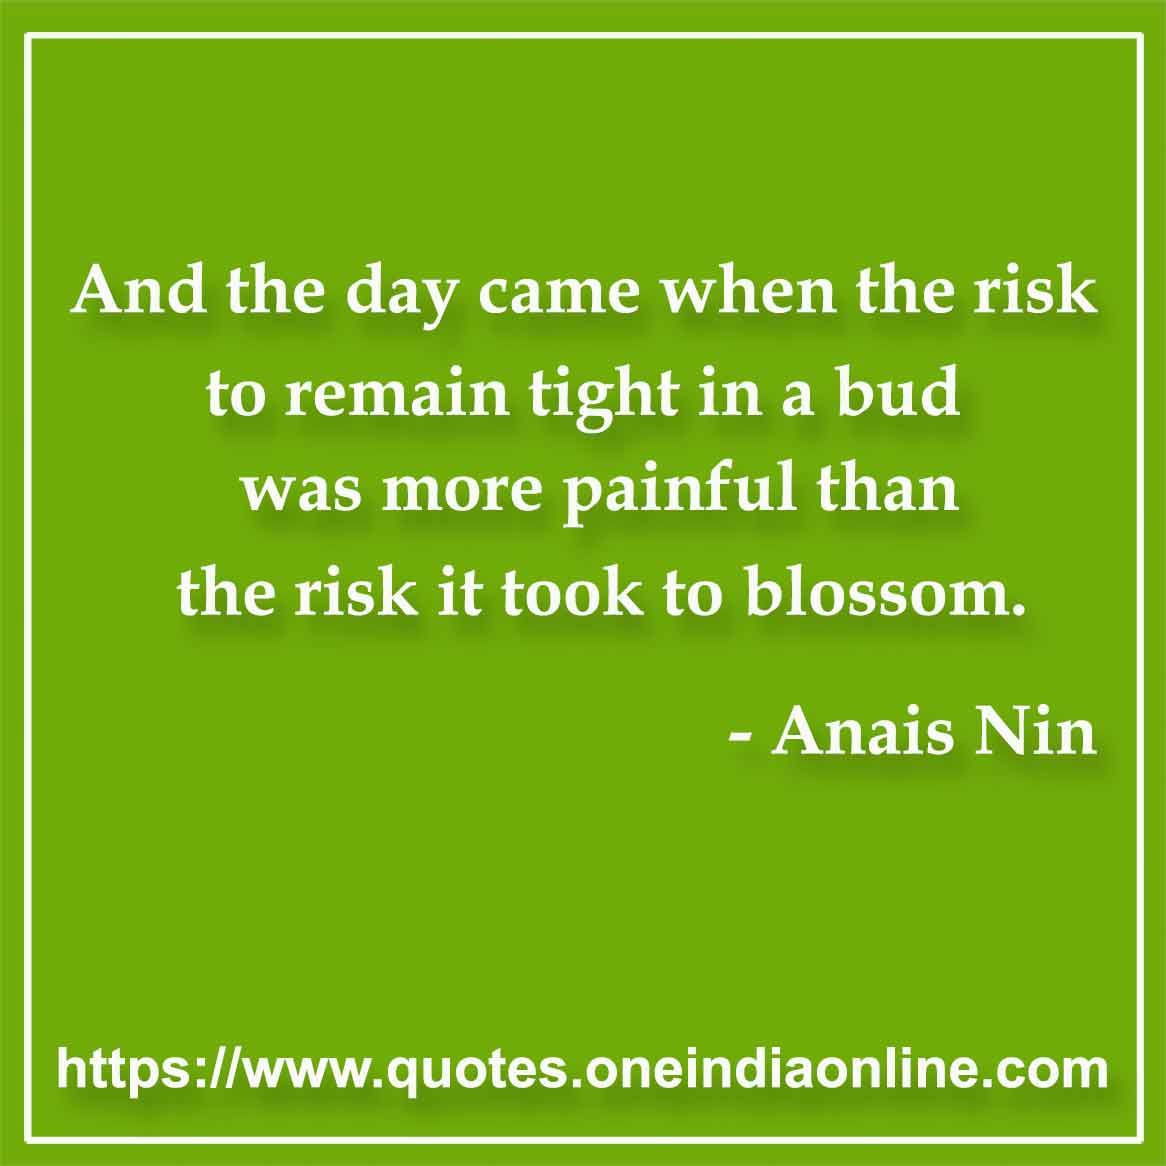 And the day came when the risk to remain tight in a bud was more painful than the risk it took to blossom.

- Risk Quotes by Anais Nin